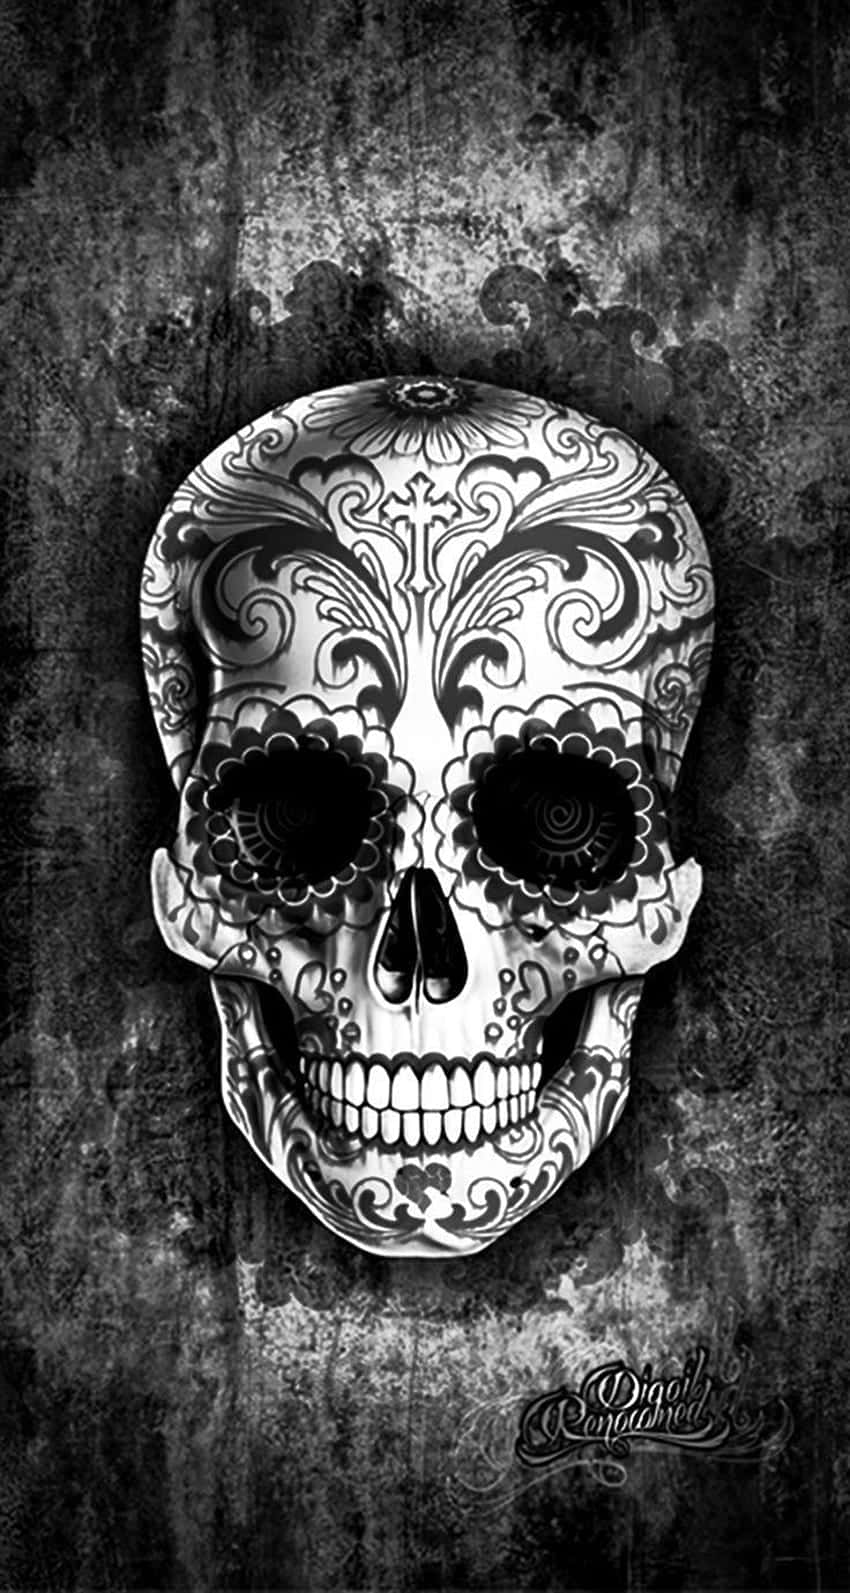 Accessorize Your Phone with a Stylish Sugar Skull Wallpaper